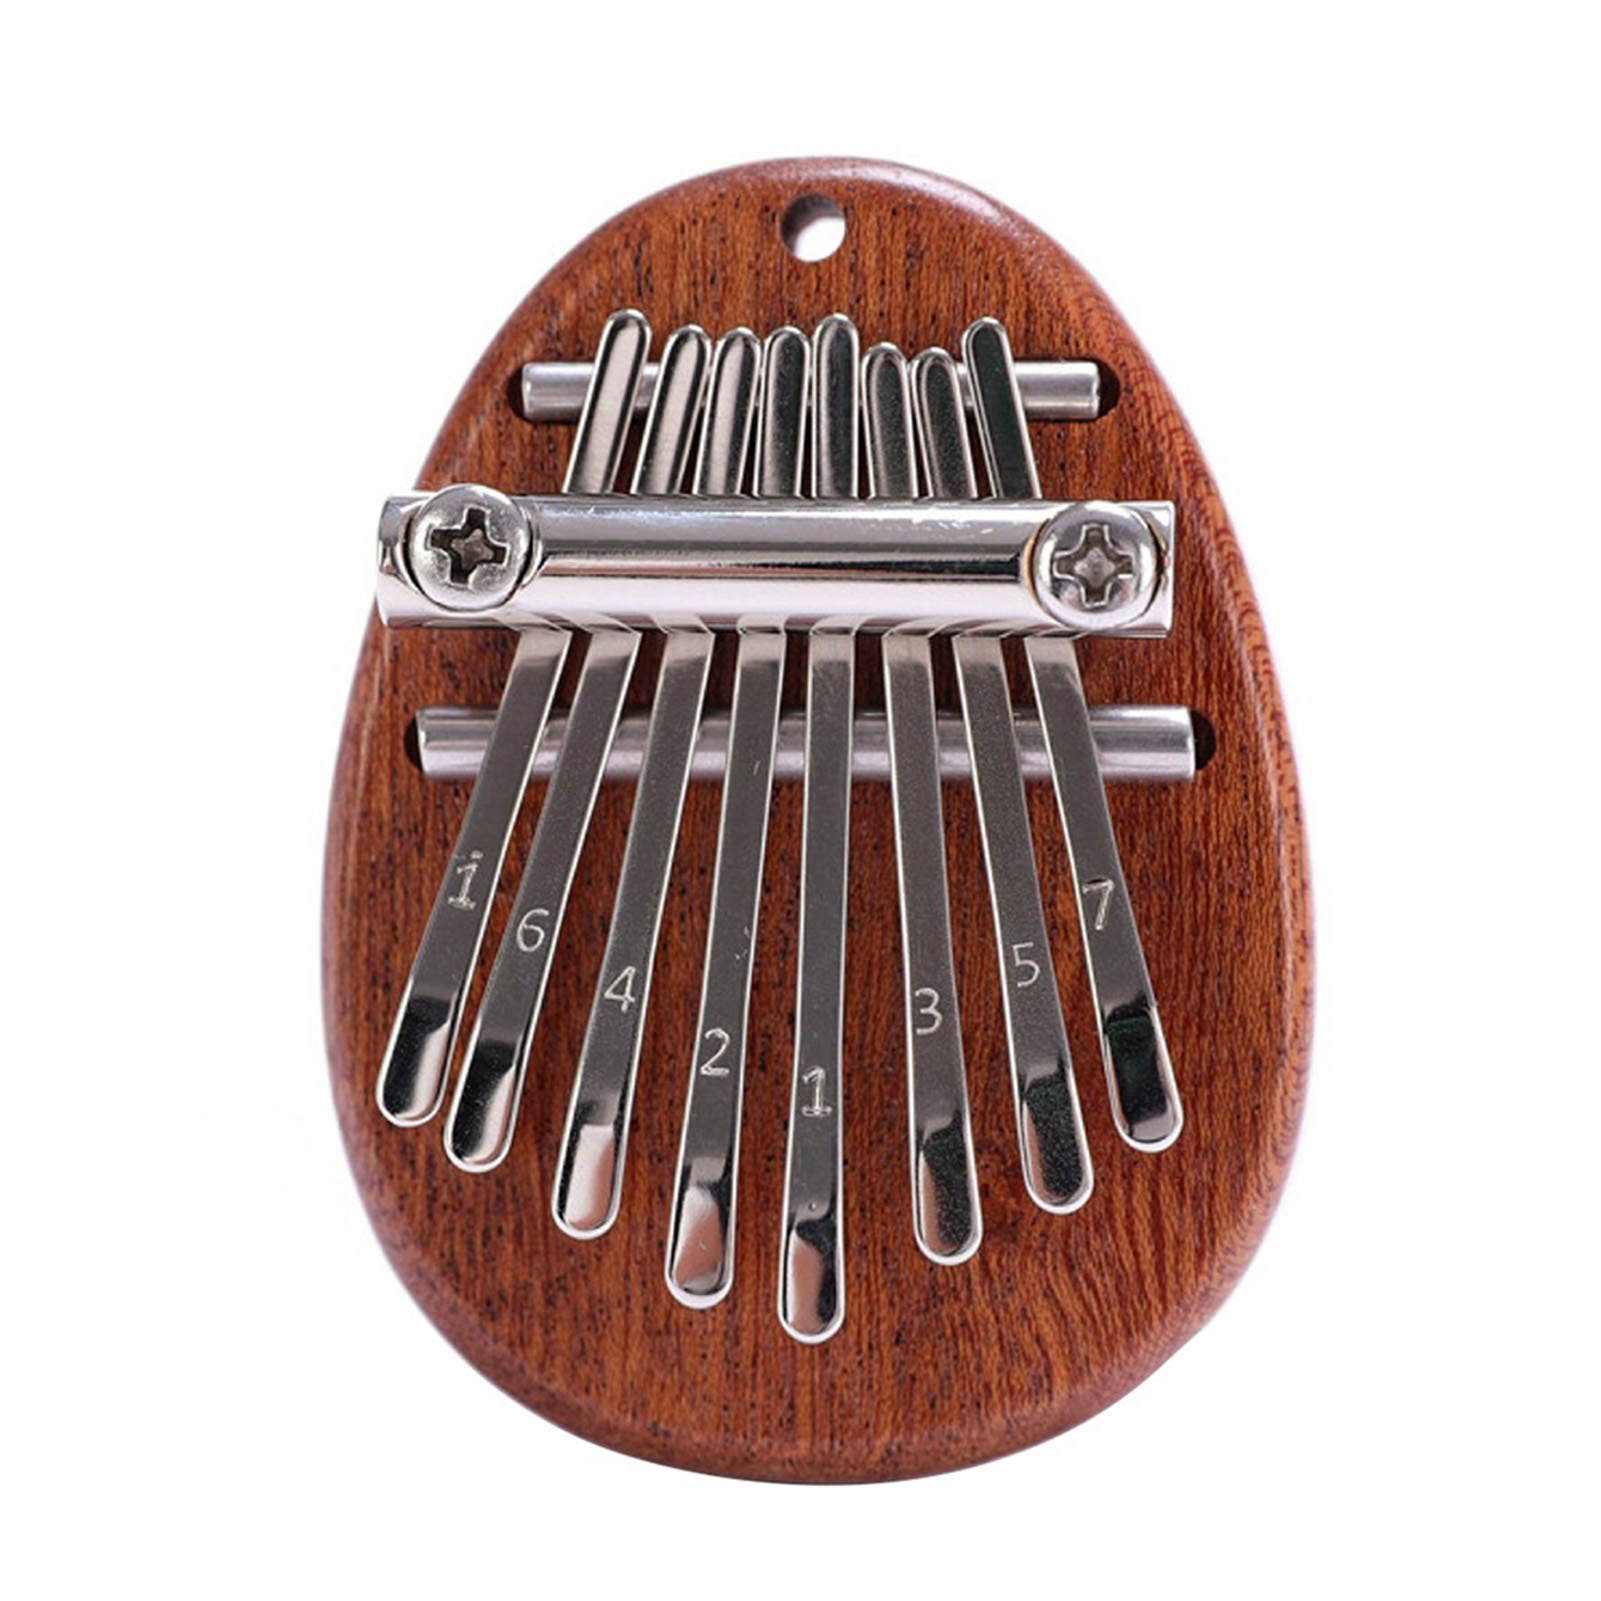 SANWOOD Thumb Piano Exquisite Fine Workmanship Musical Instrument Kalimba Finger Thumb Piano for Kids Adults Beginners - image 1 of 6